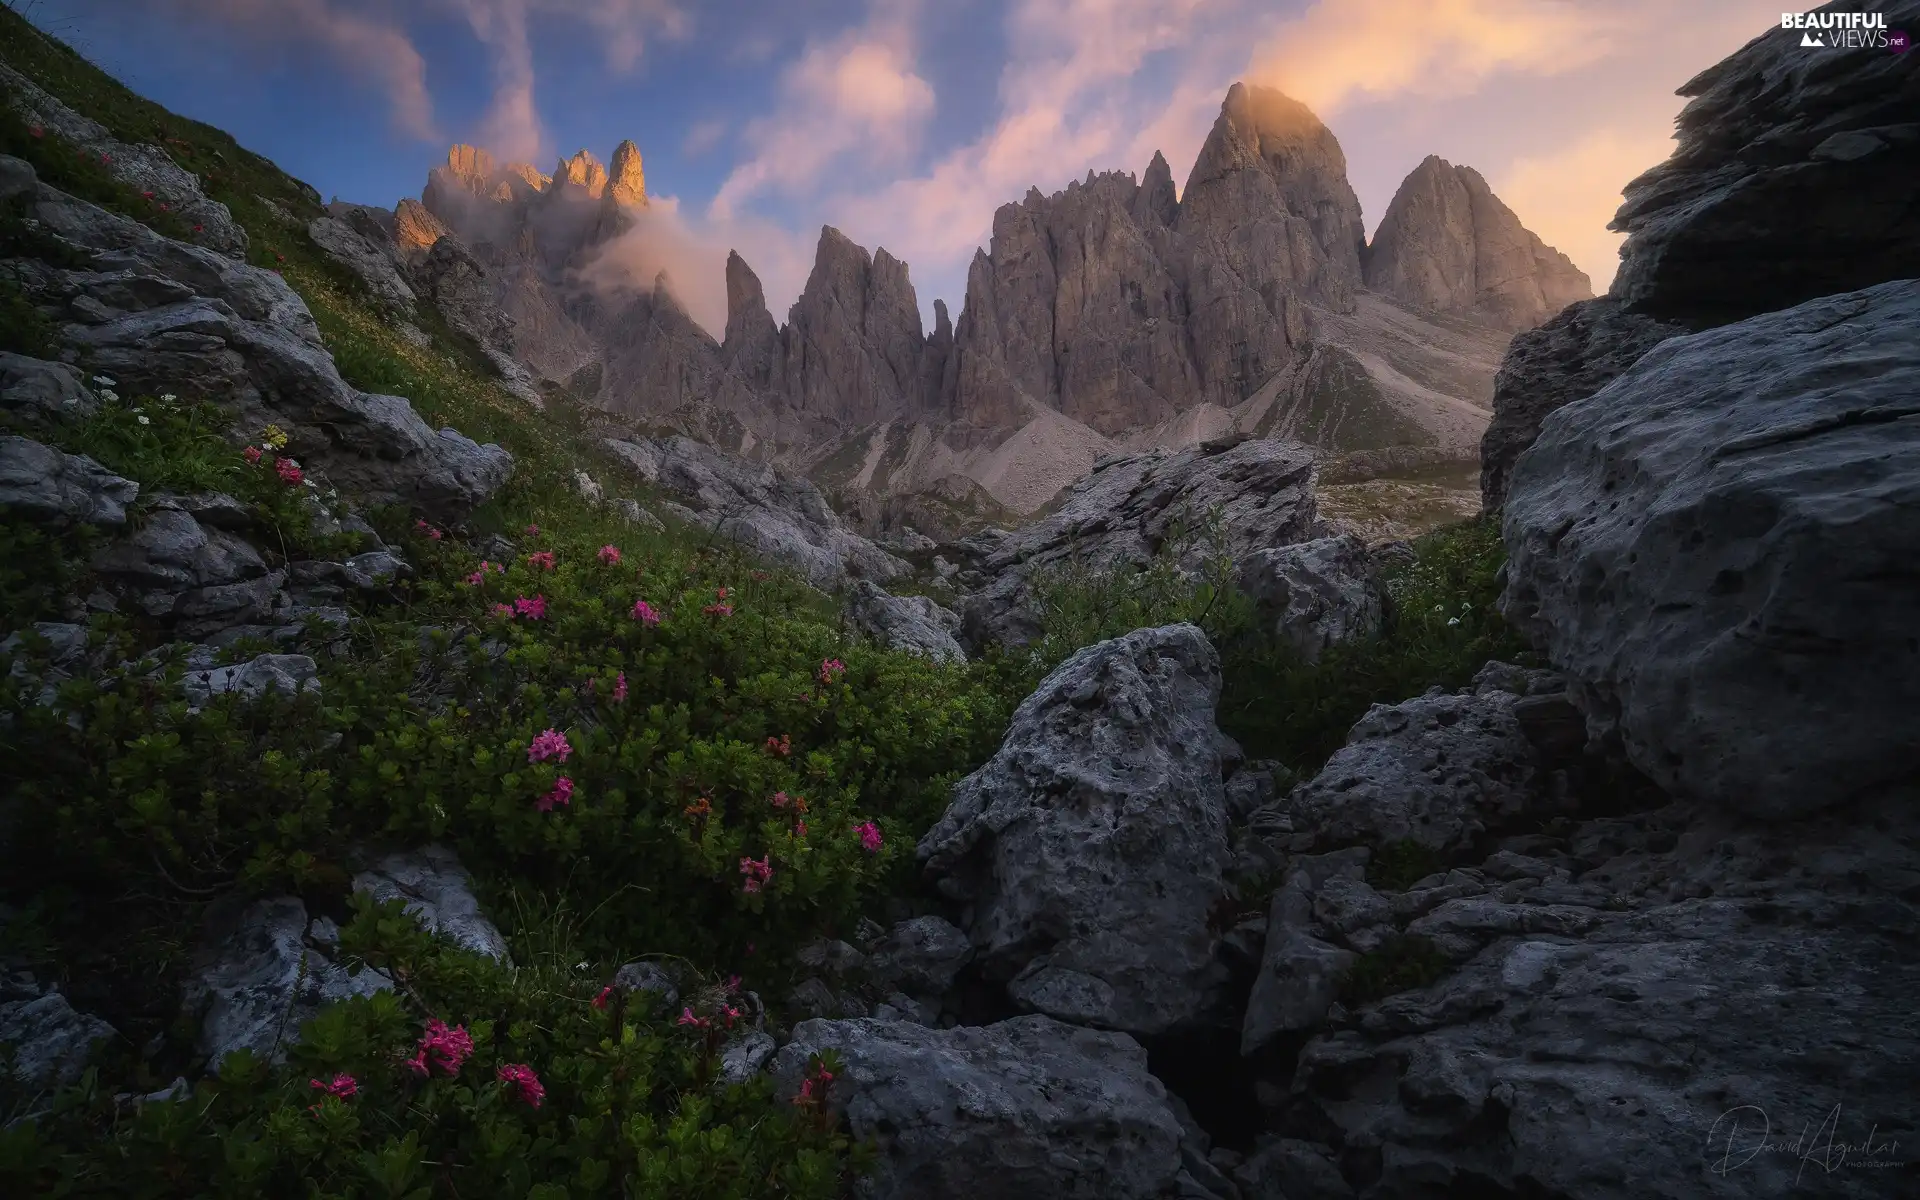 Flowers, rhododendron, Dolomites, rocks, Mountains